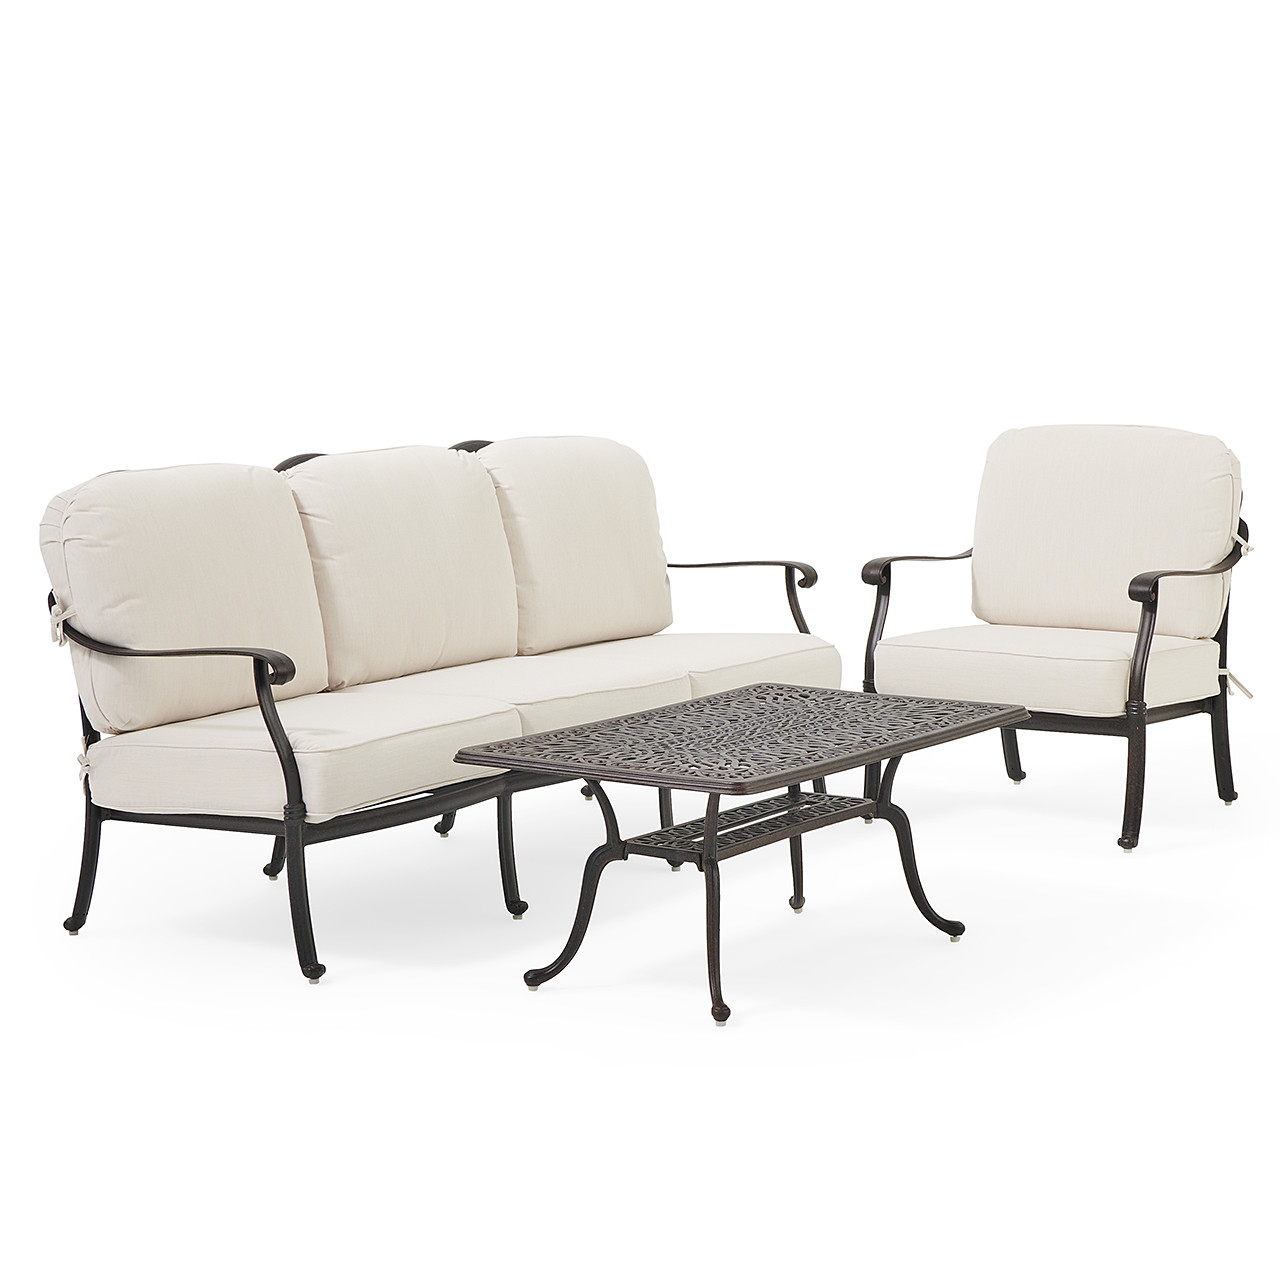 Cadiz Aged Bronze Cast Aluminum with Cushions 3 Piece Sofa Group + 42 x 26 in. Coffee Table